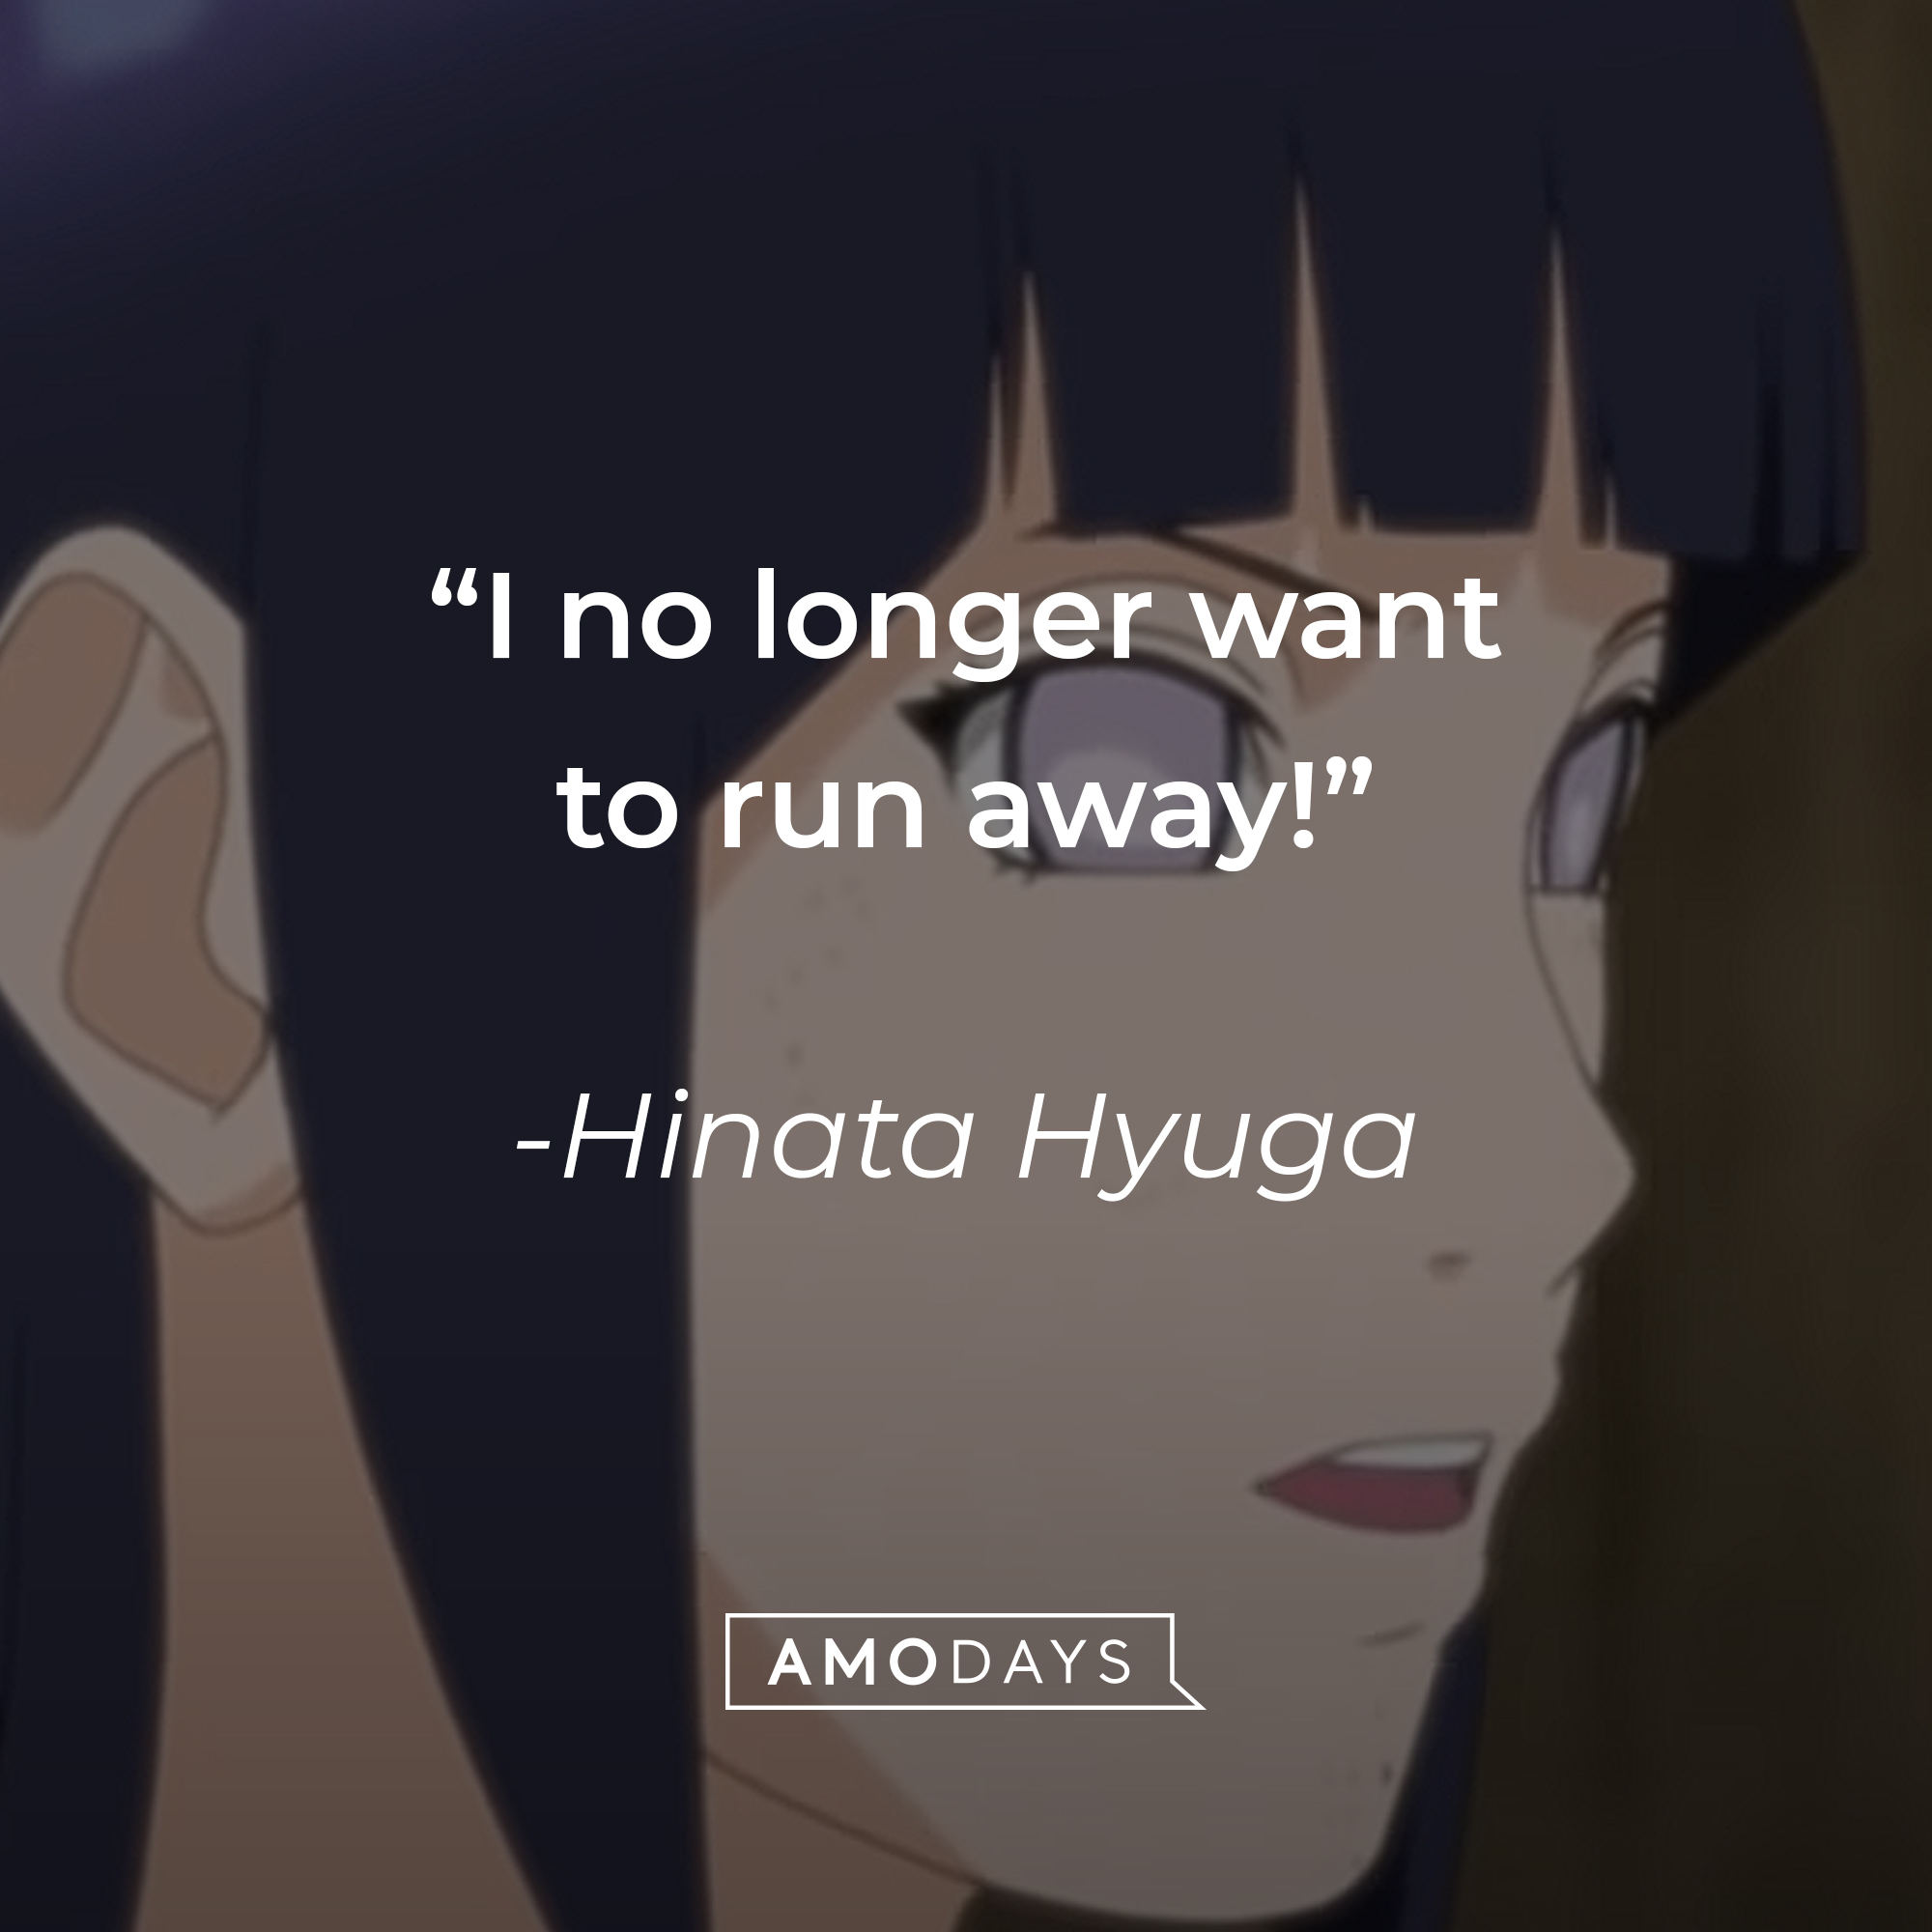 Hinata Hyuga with her quote: "Therefore, stand up together with me, Naruto…” | Source: youtube.com/CrunchyrollCollection